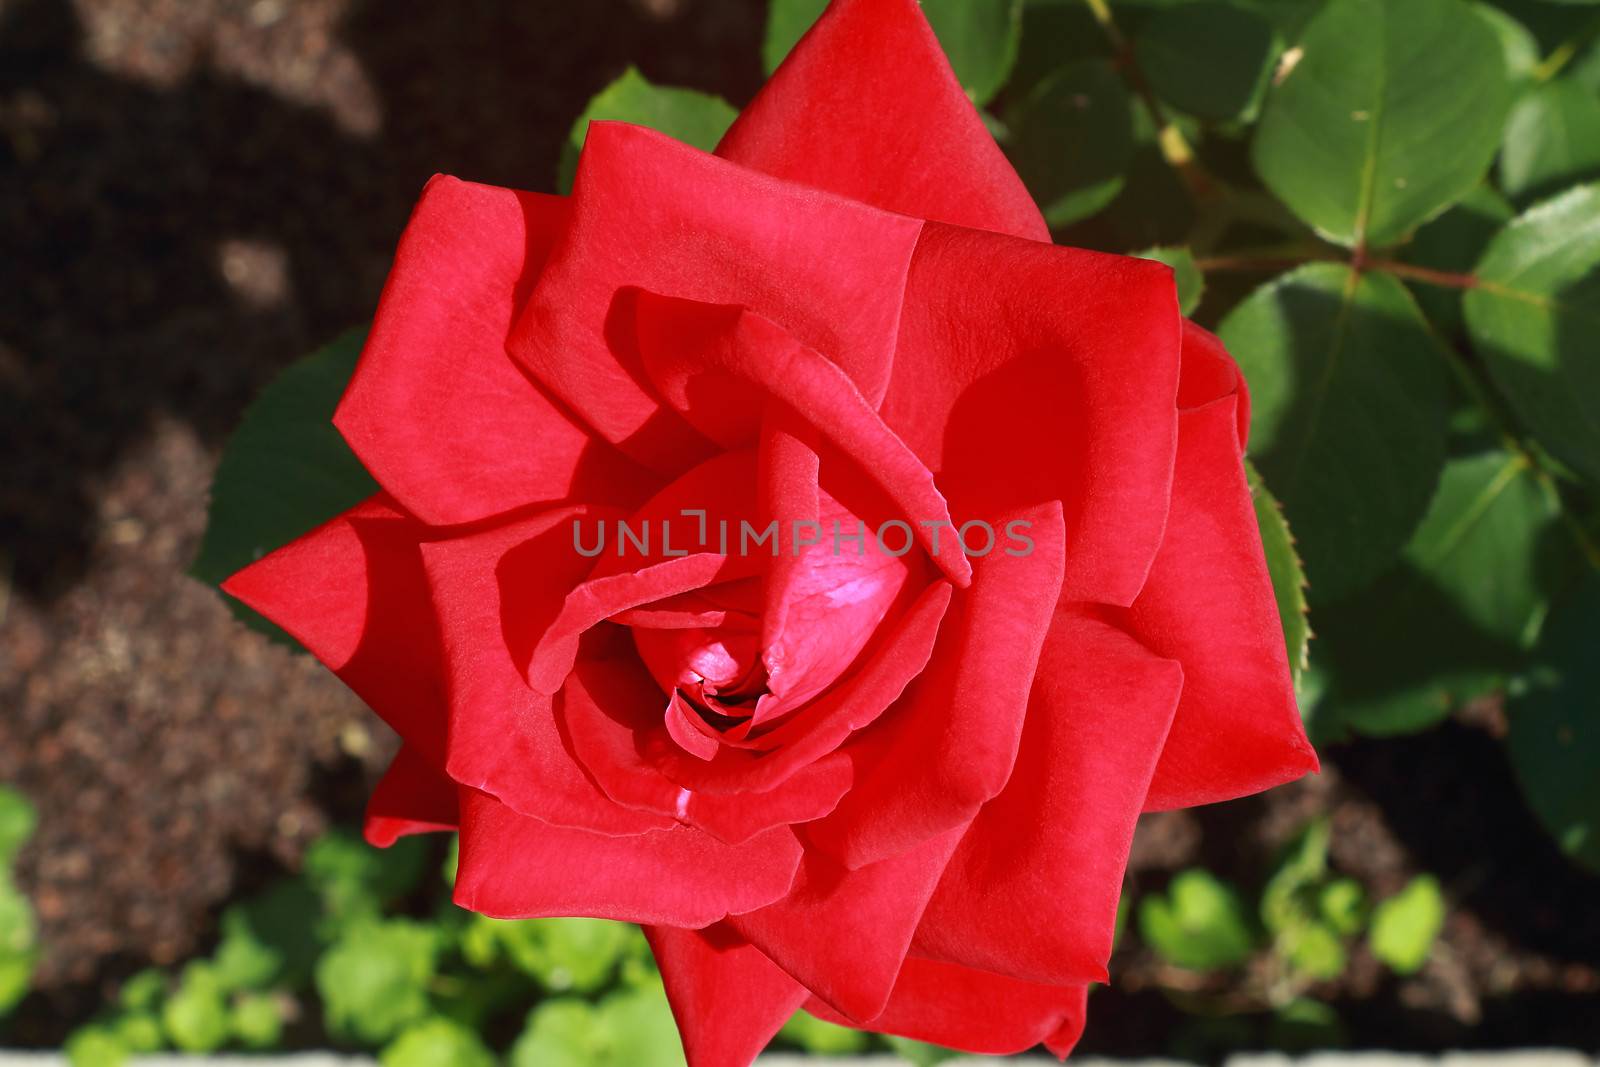 Scarlet flower tea-hybrid rose , blooming in the garden . Photographed close-up on the background of green leaves